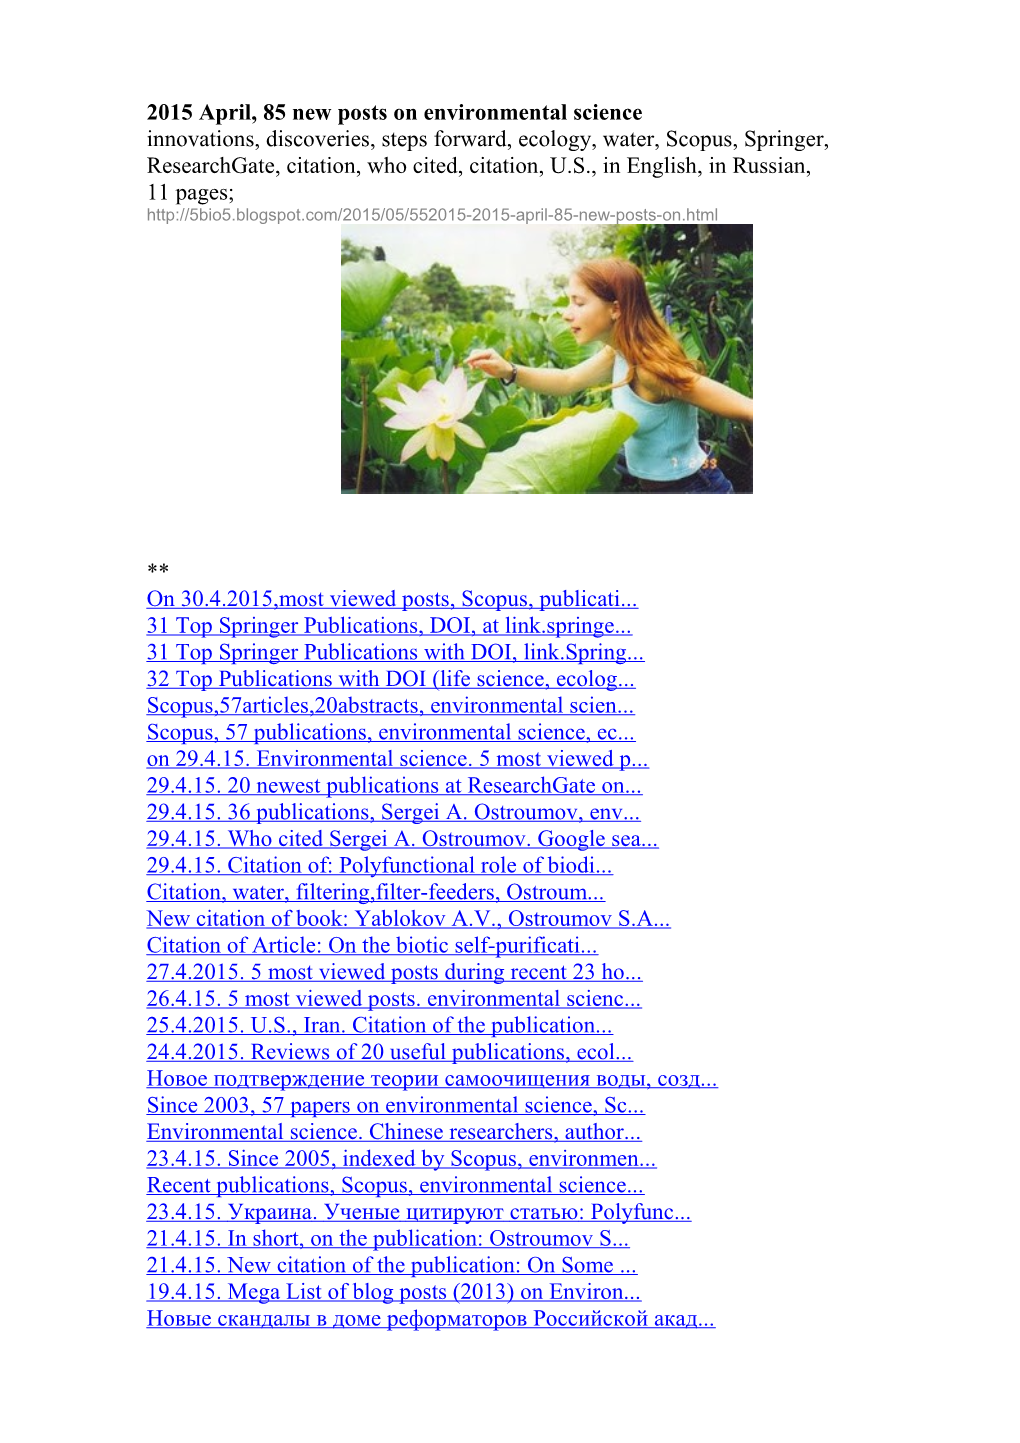 2015 April, 85 New Posts on Environmental Science